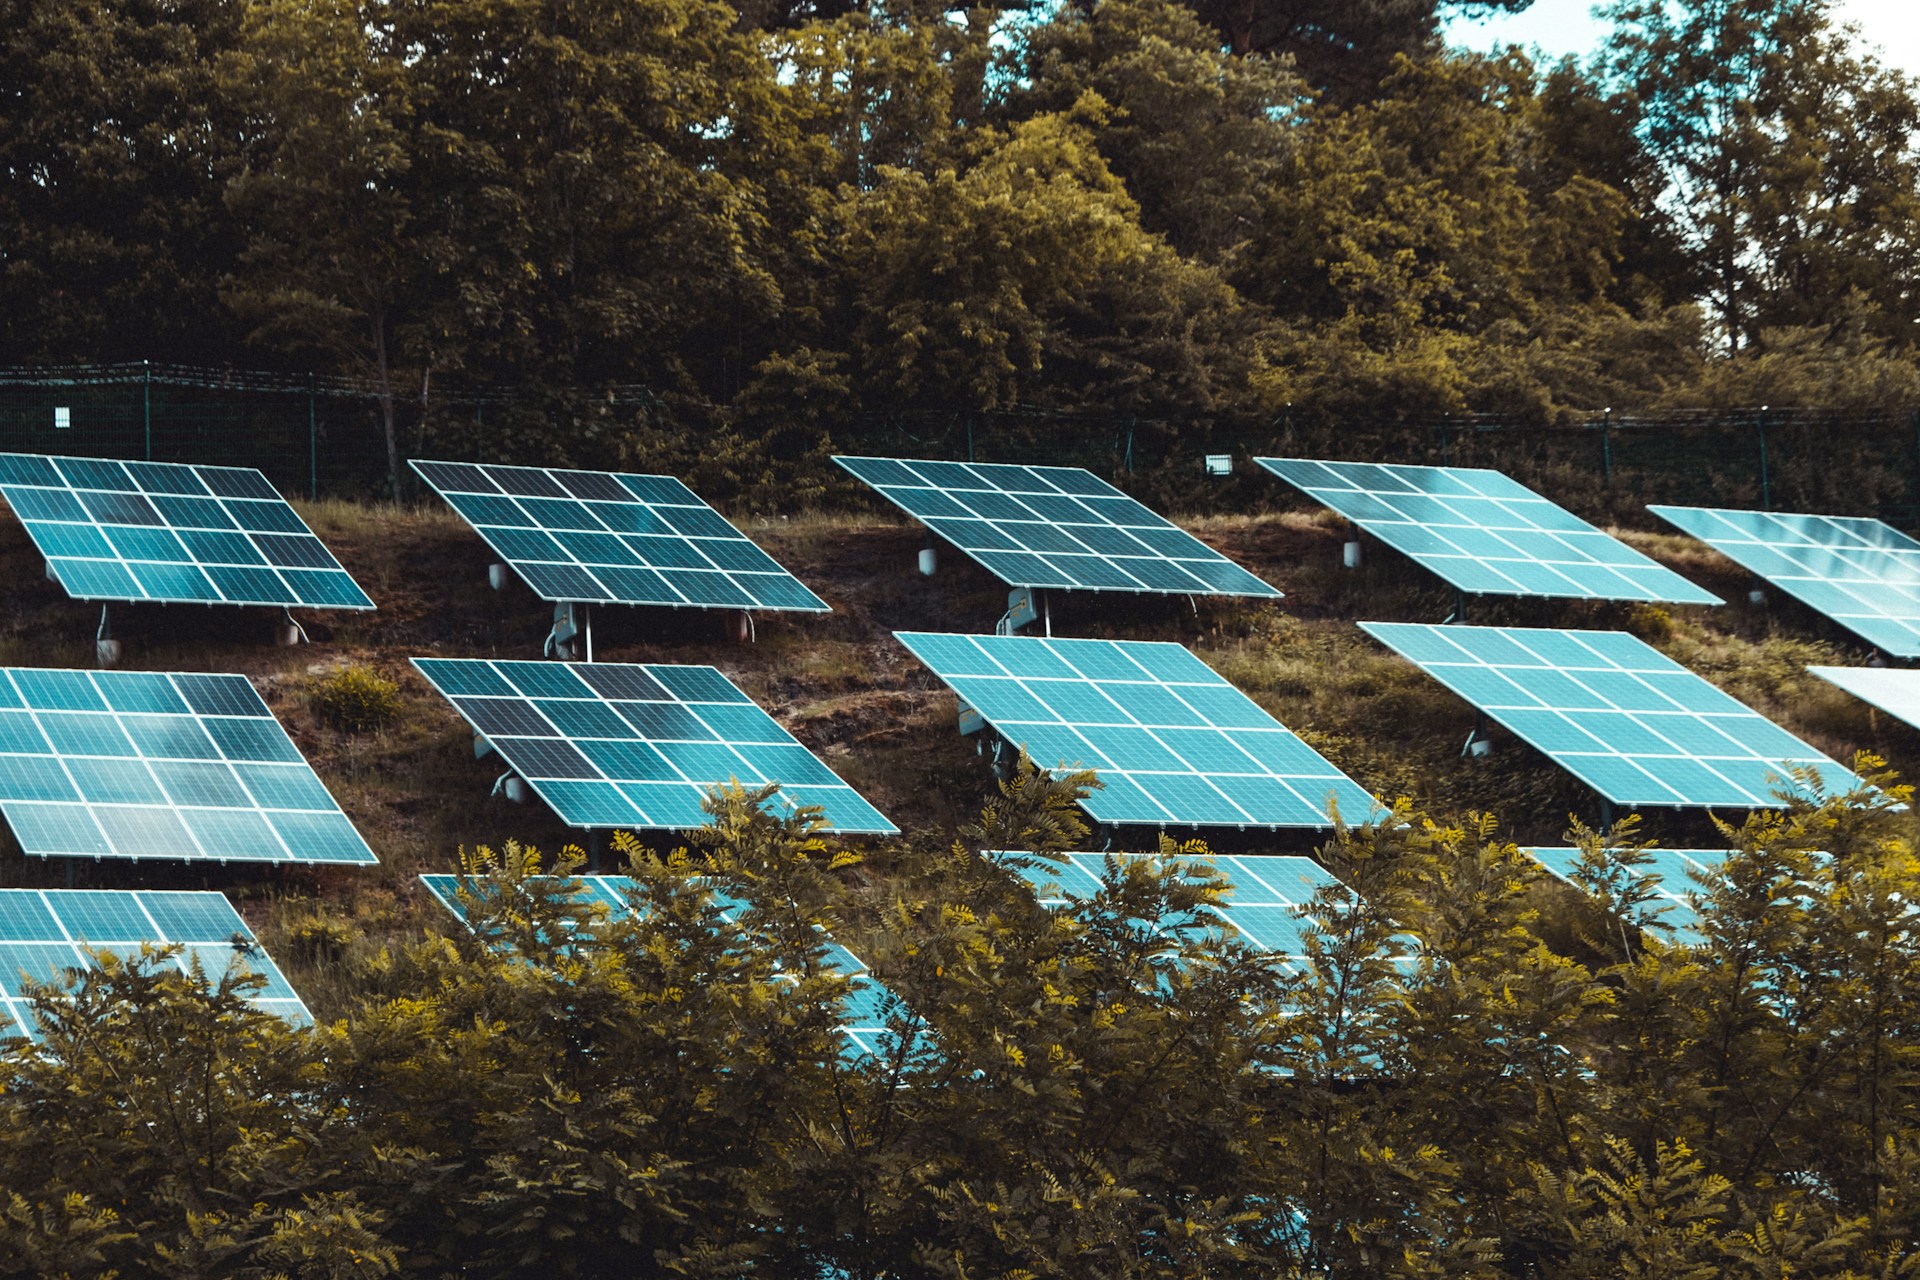 American Solar Installations Reach Key Milestone, Growth Trajectory Could be Disrupted by AI Demands